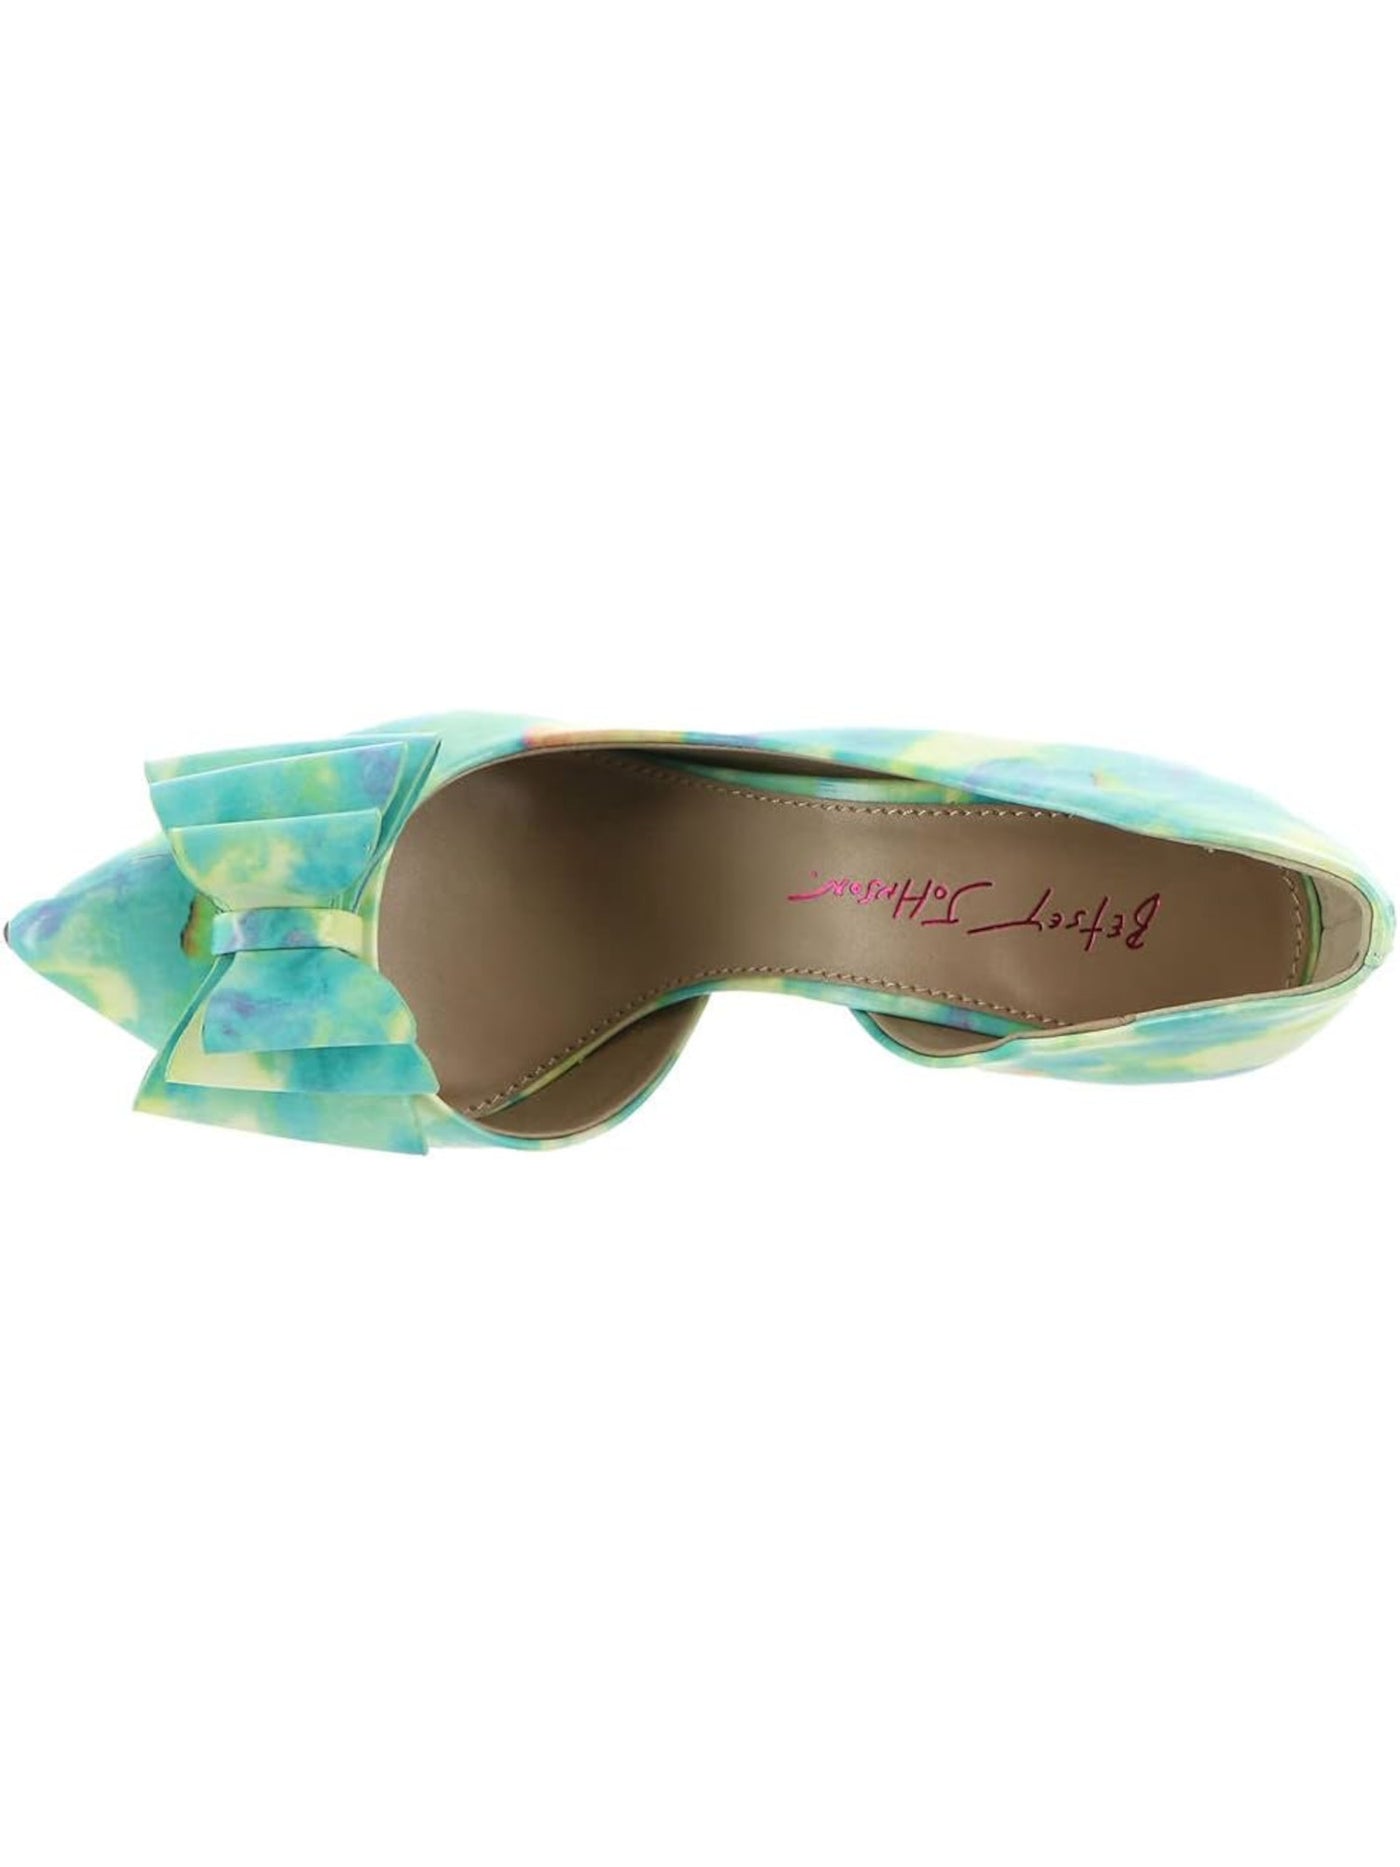 BETSEY JOHNSON Womens Turquoise Printed Bow Accent Padded Prince-p Pointed Toe Stiletto Slip On Pumps Shoes 6.5 M